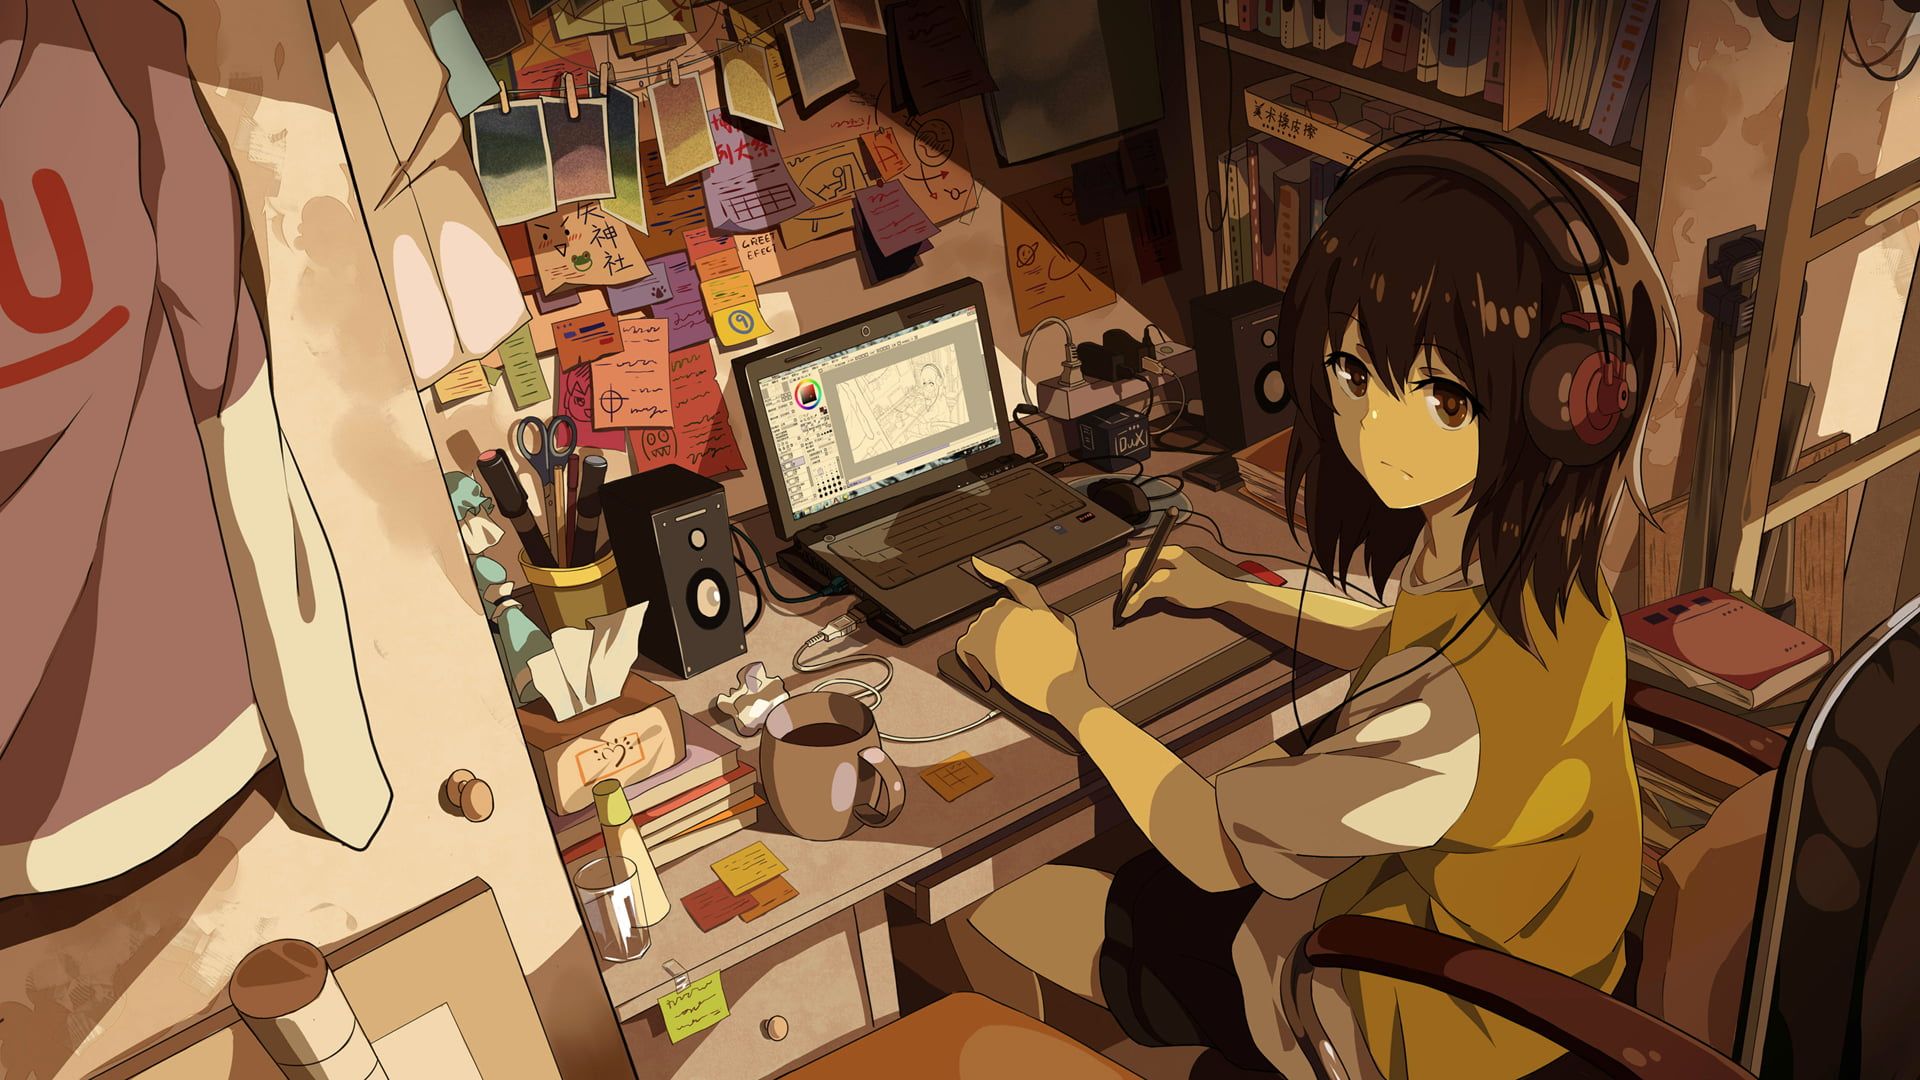 Female anime character sitting on chair near laptop computer wallpaper. Anime characters, Anime, Computer wallpaper hd